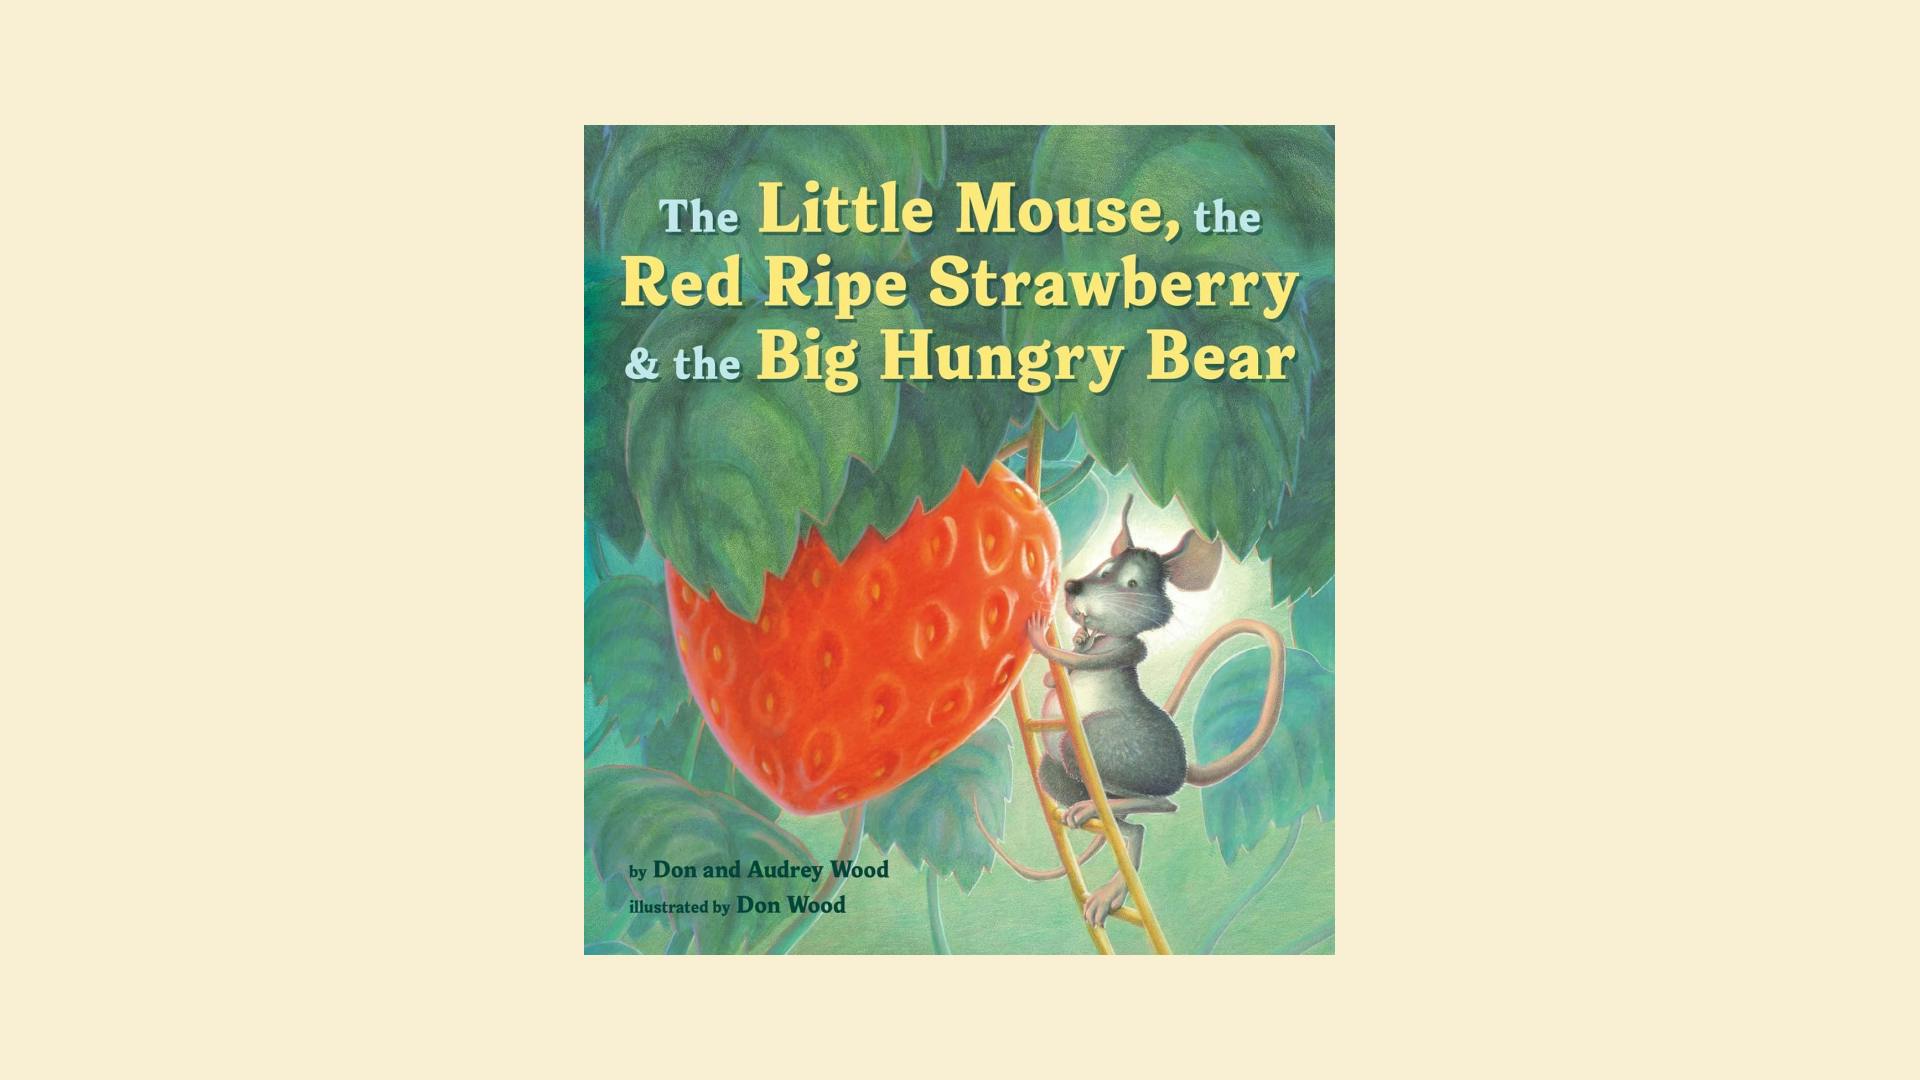 book about a mouse and strawberry